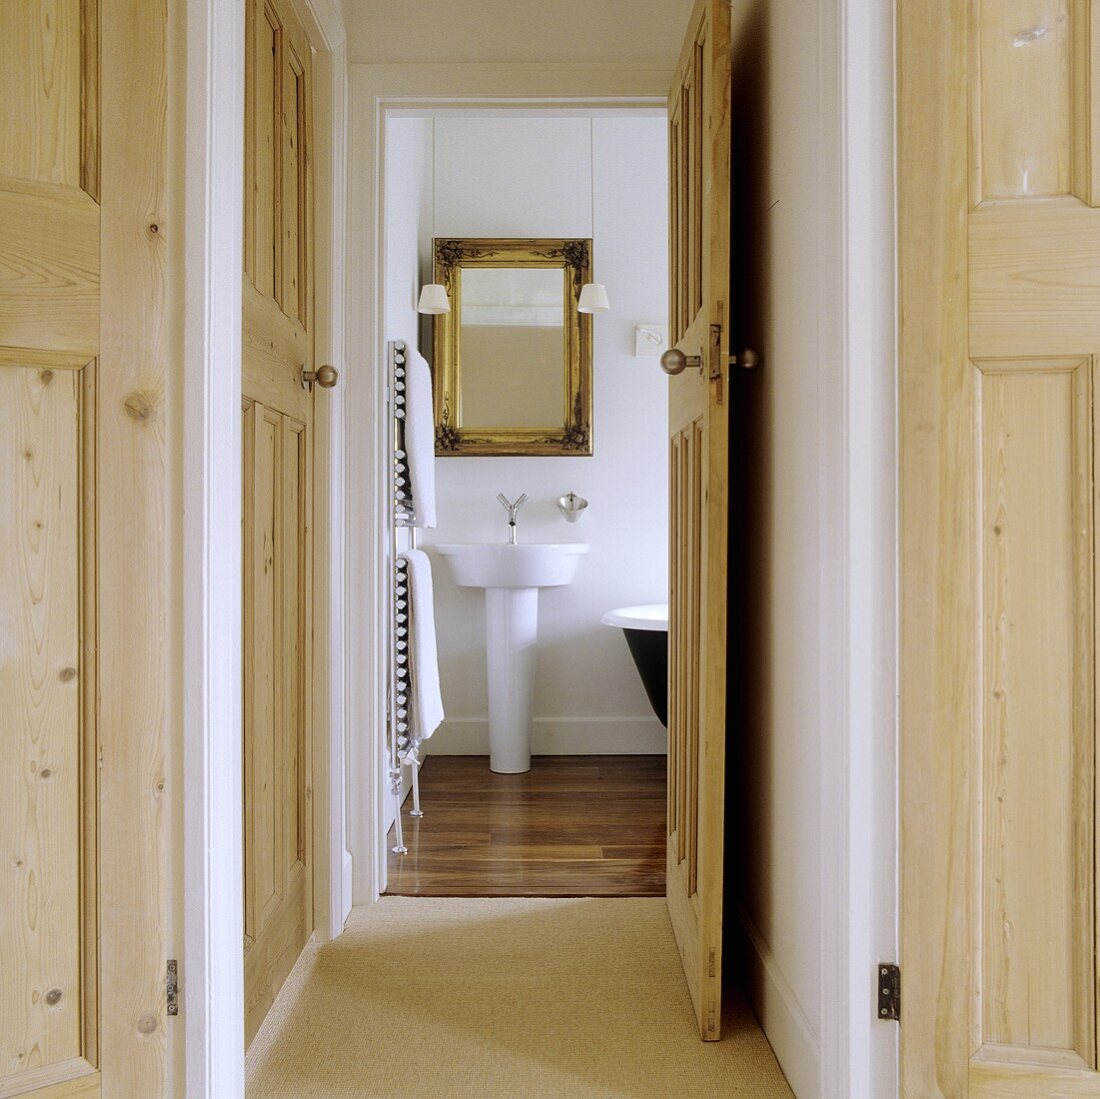 The hallway of an apartment with an open wooden door providing a view onto a designer wash basin and a golden-framed mirror